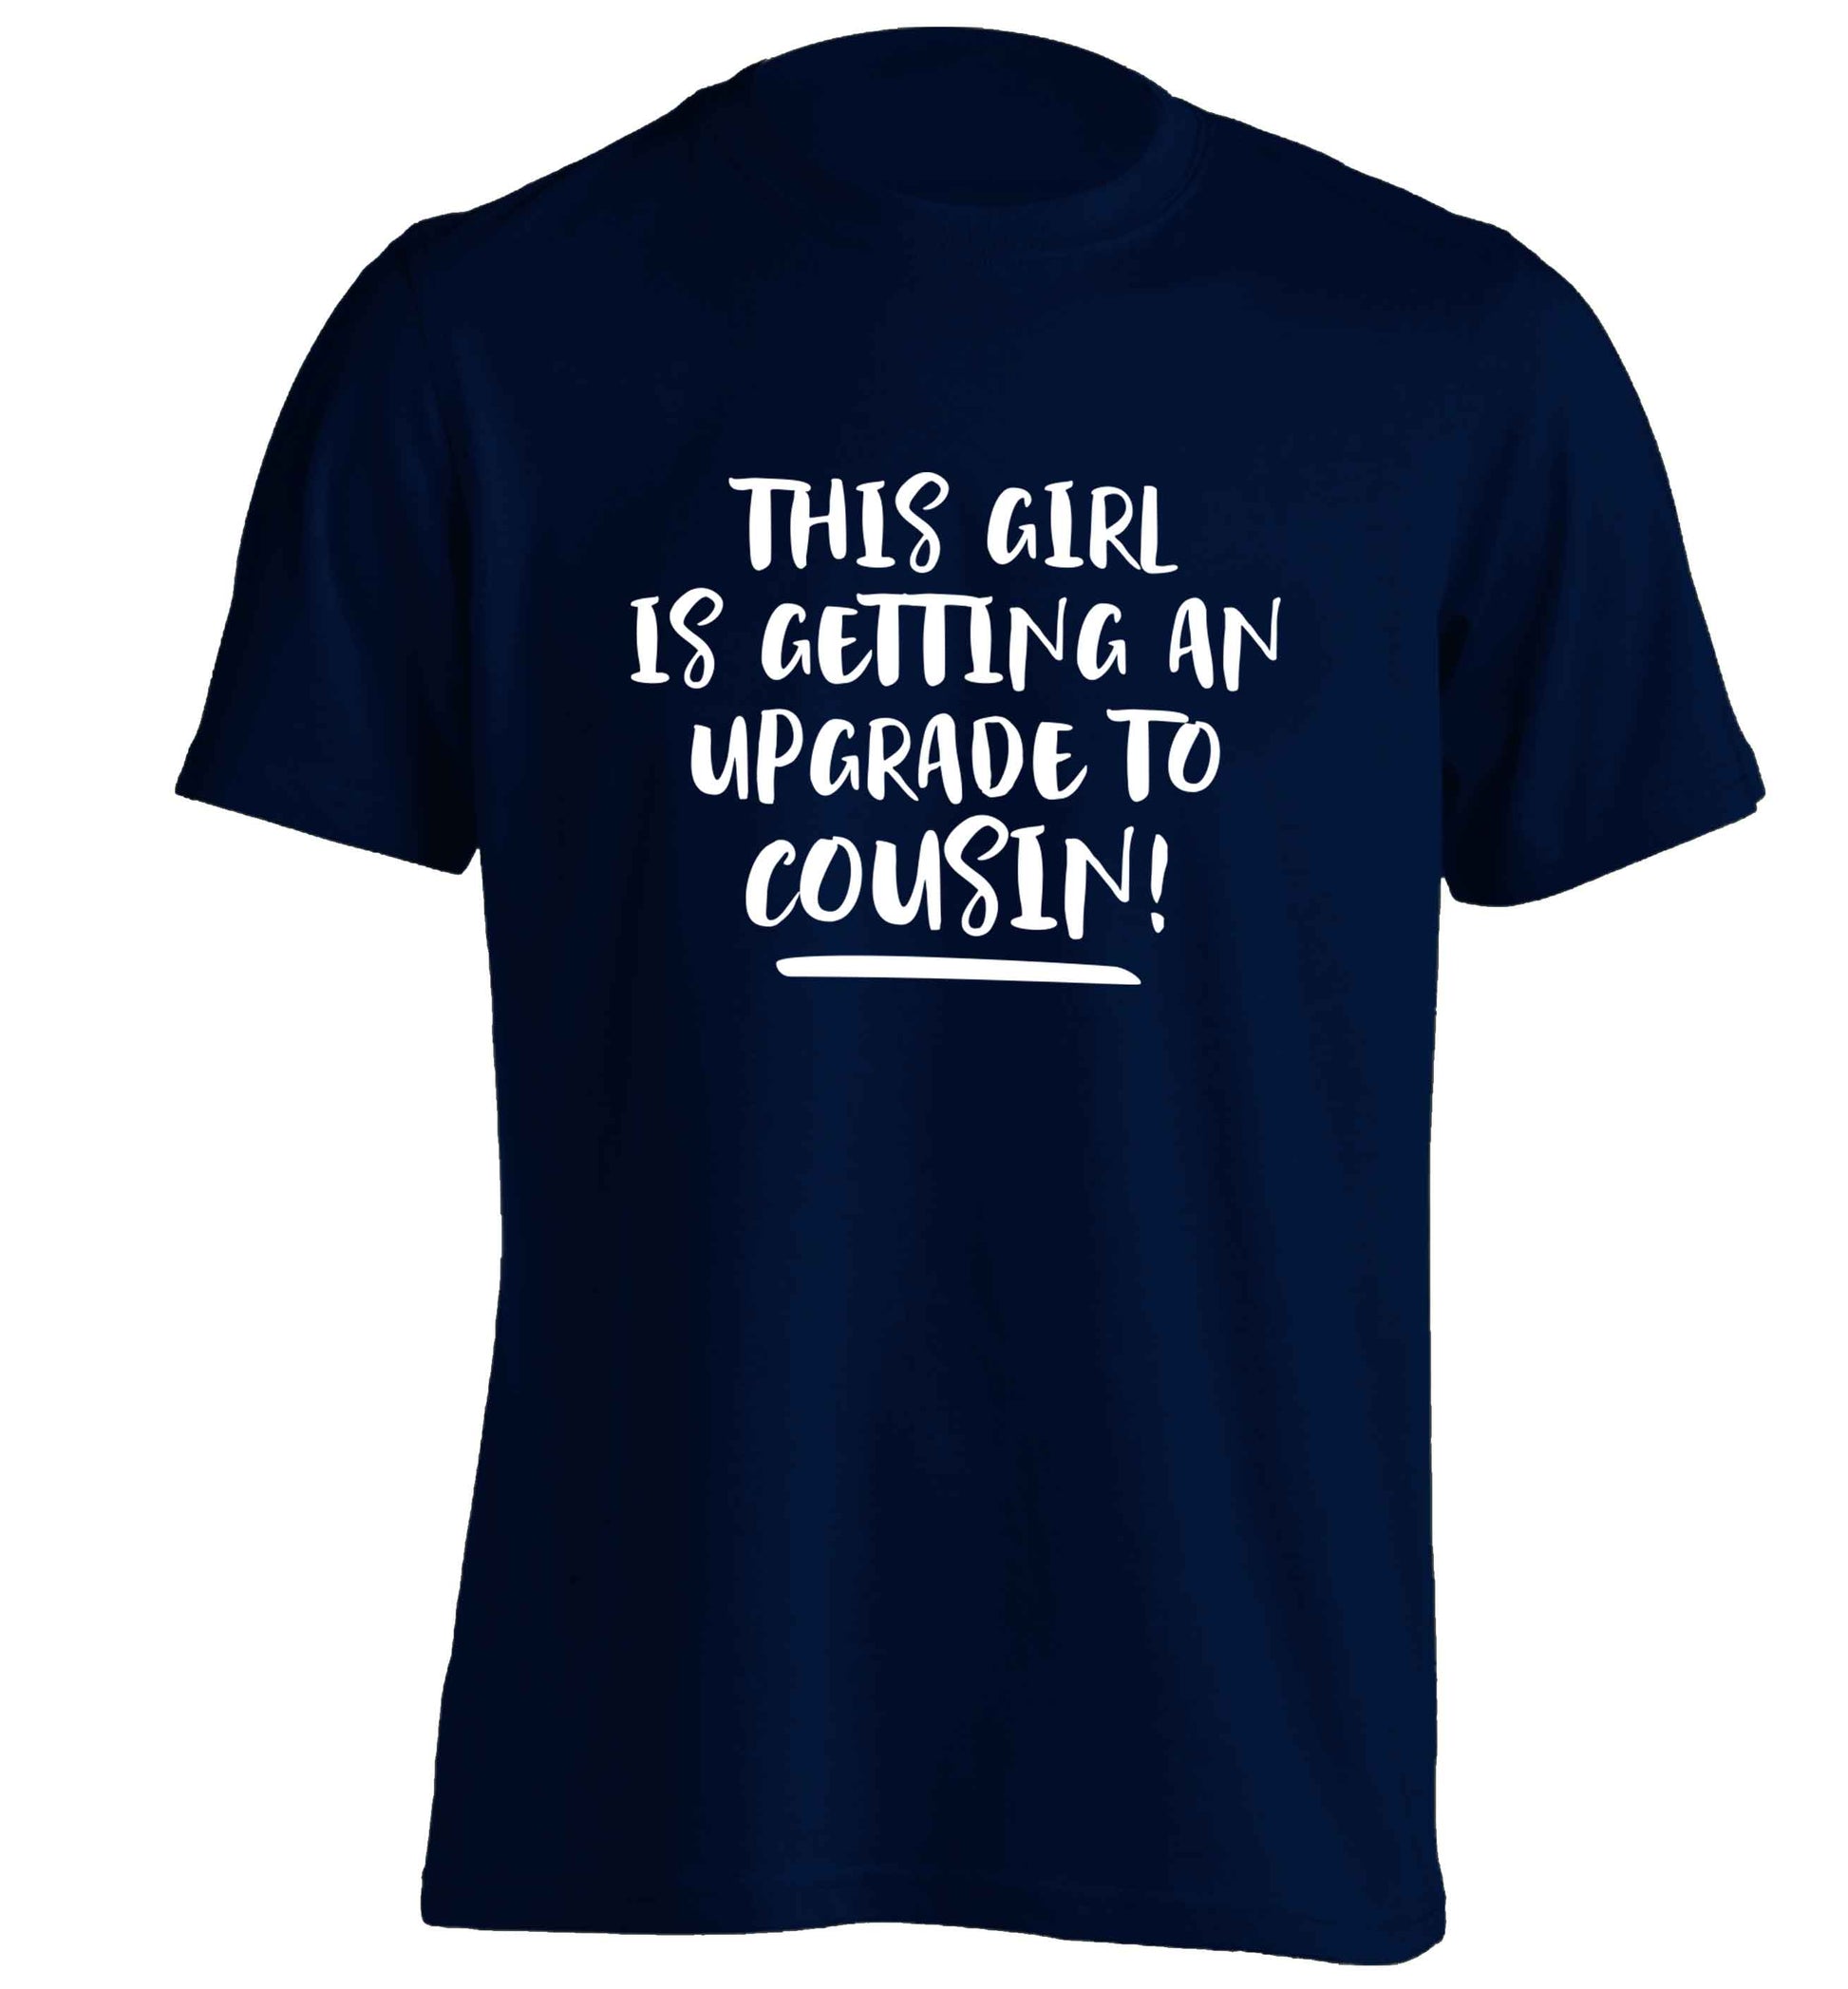 This girl is getting an upgrade to cousin! adults unisex navy Tshirt 2XL